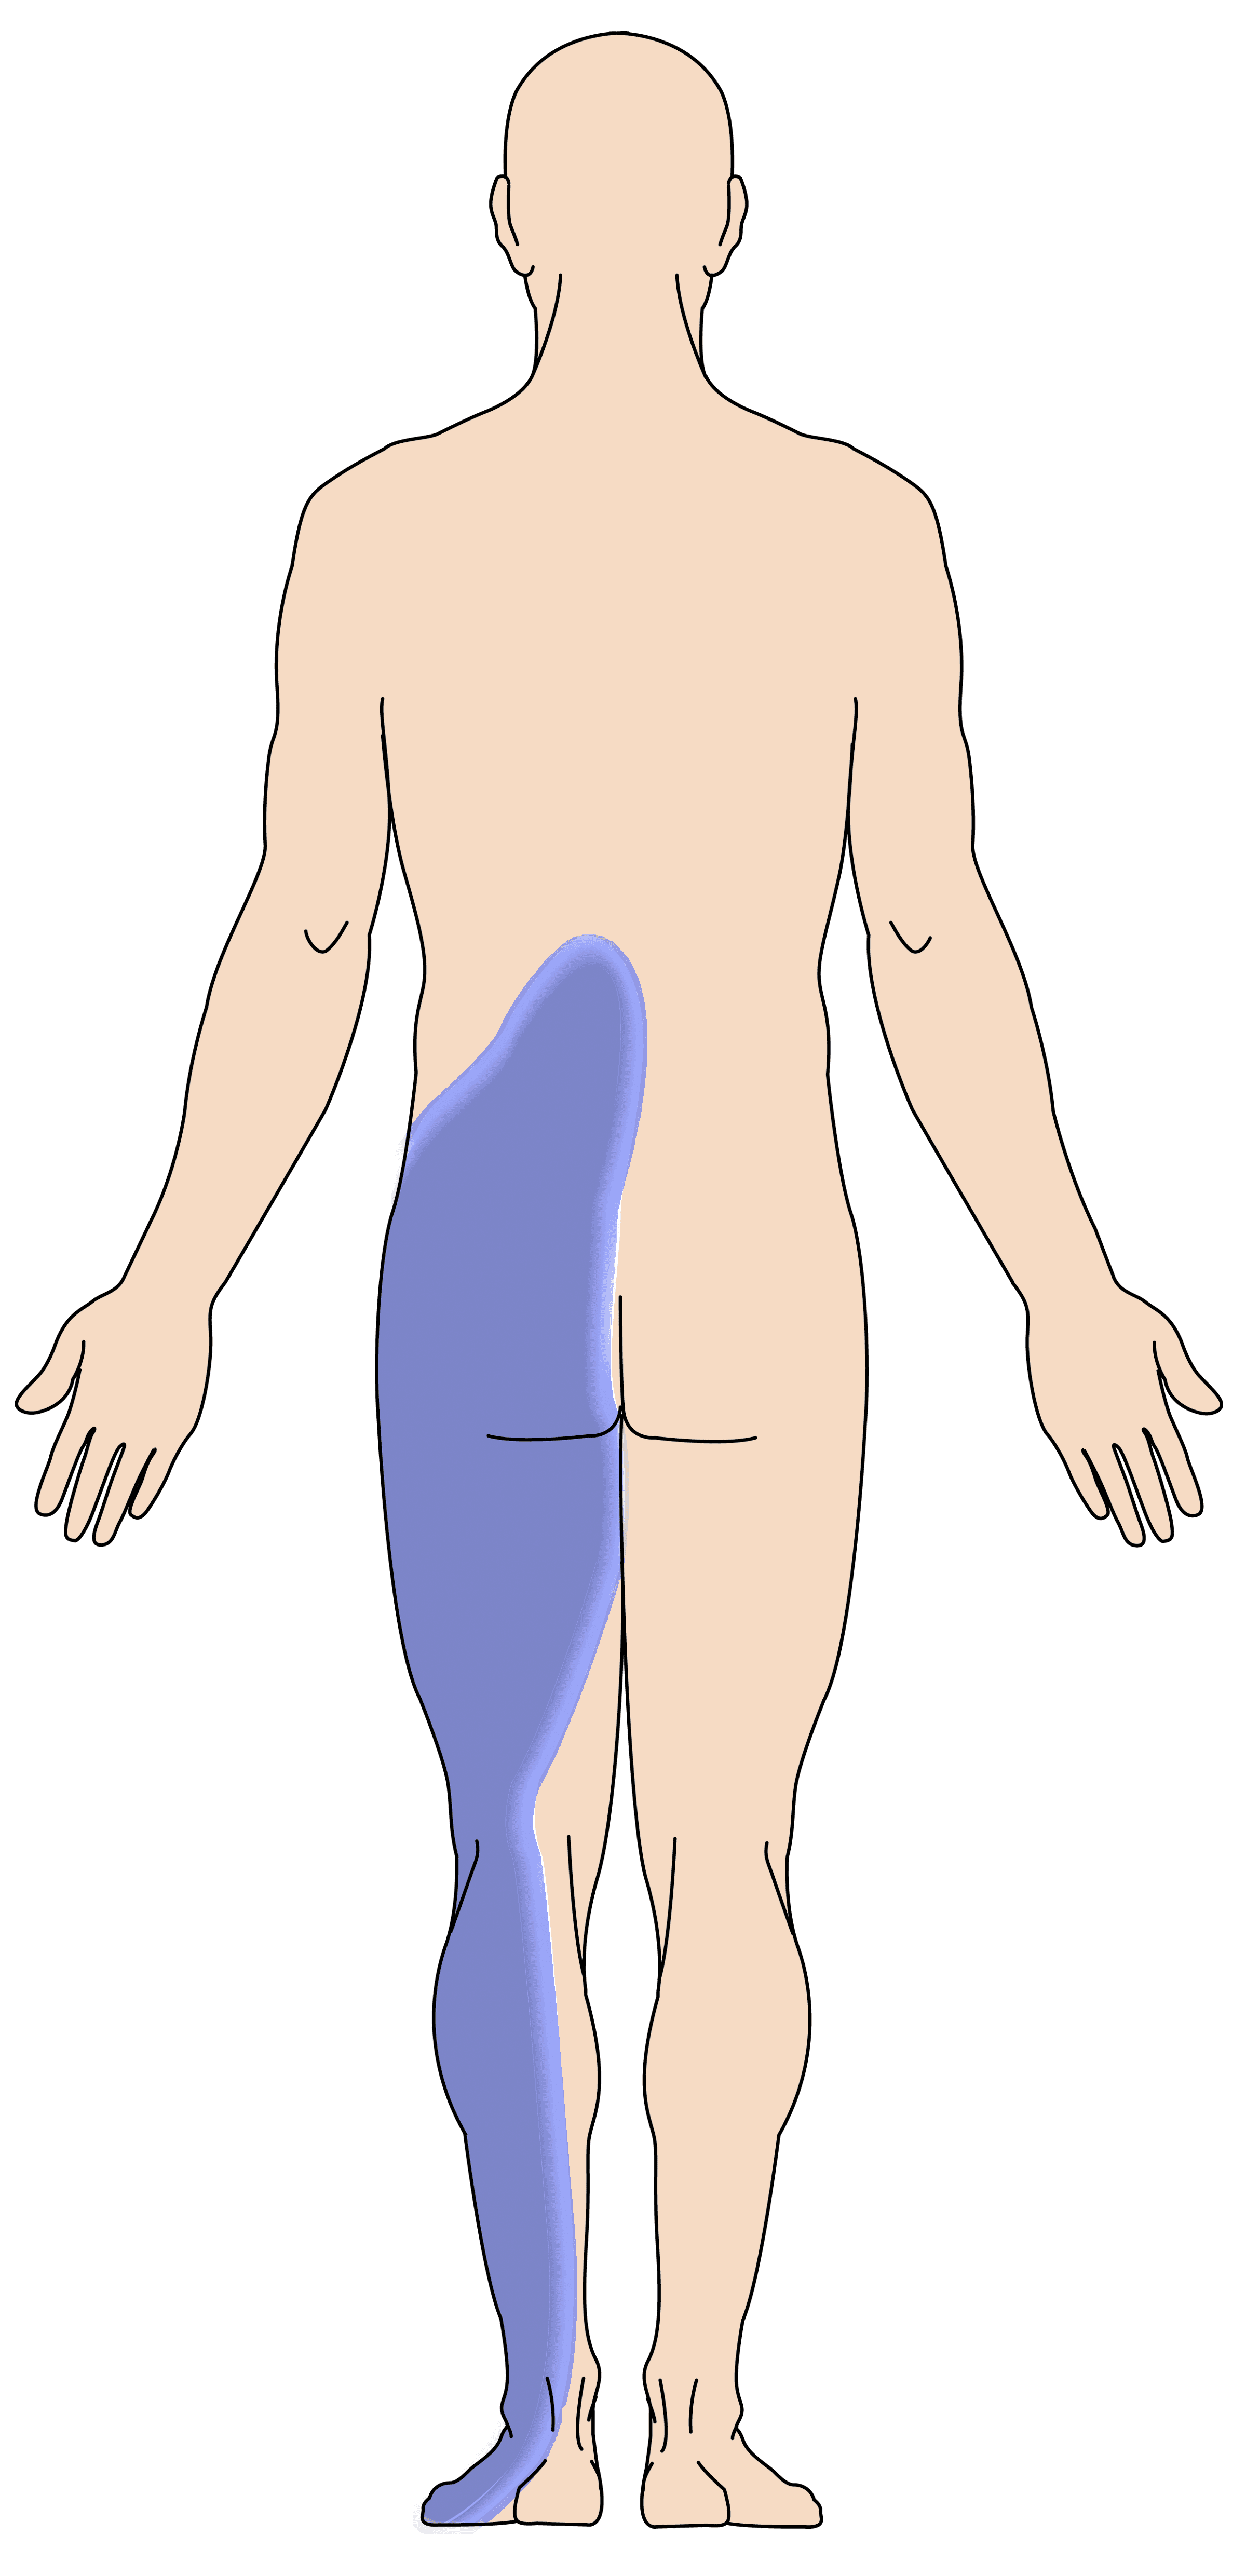 Location of back pain from spinal steonosis